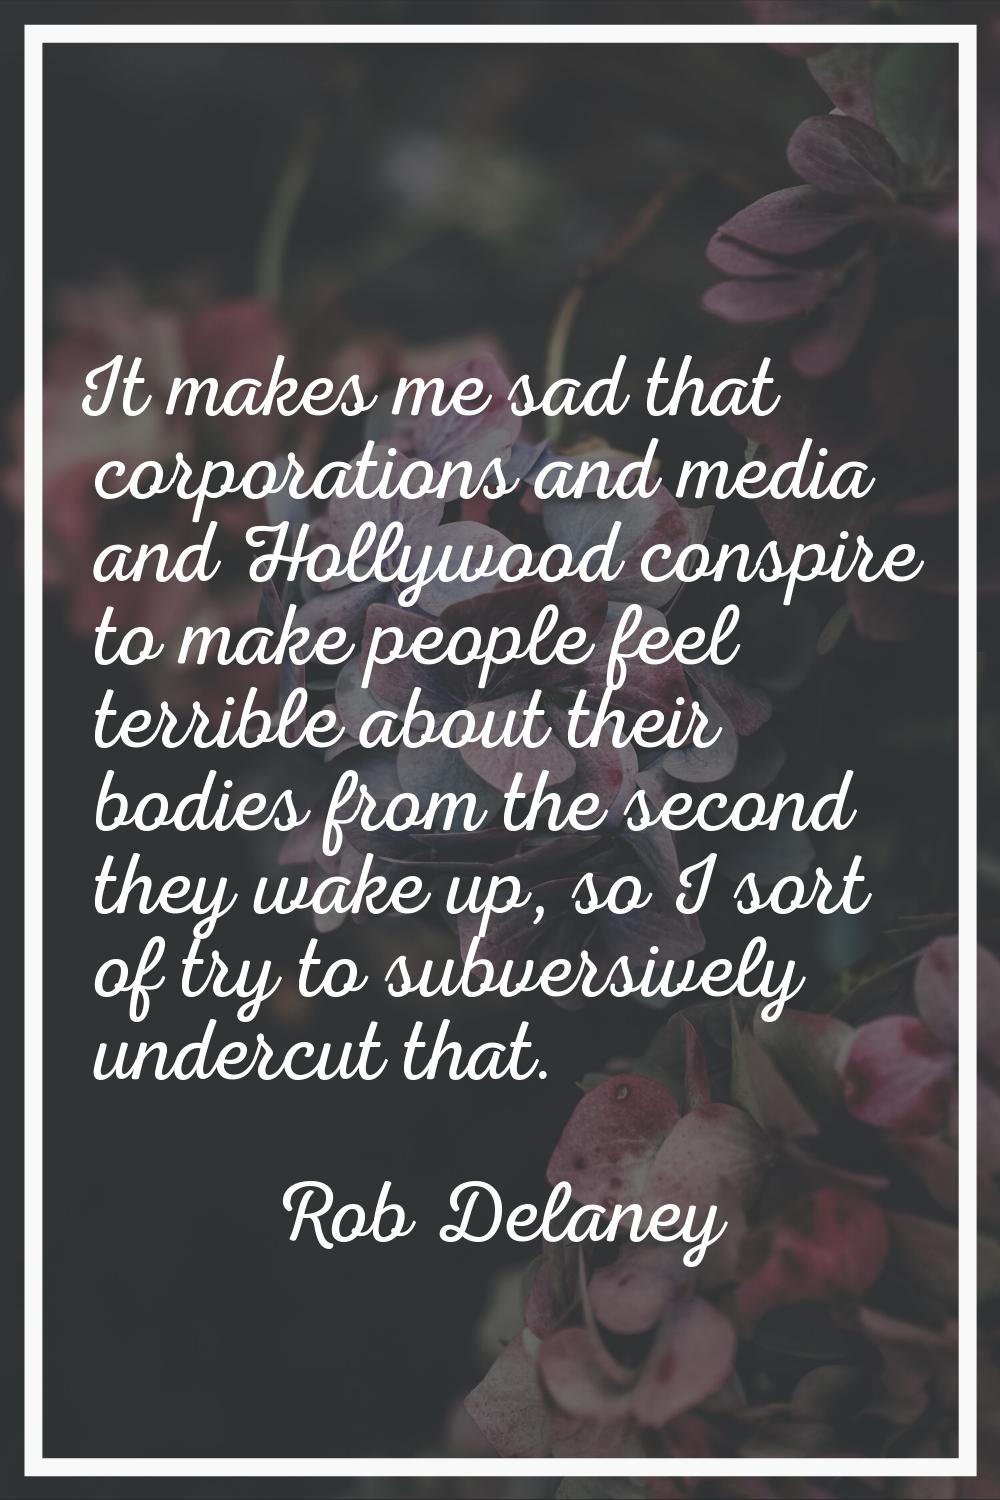 It makes me sad that corporations and media and Hollywood conspire to make people feel terrible abo